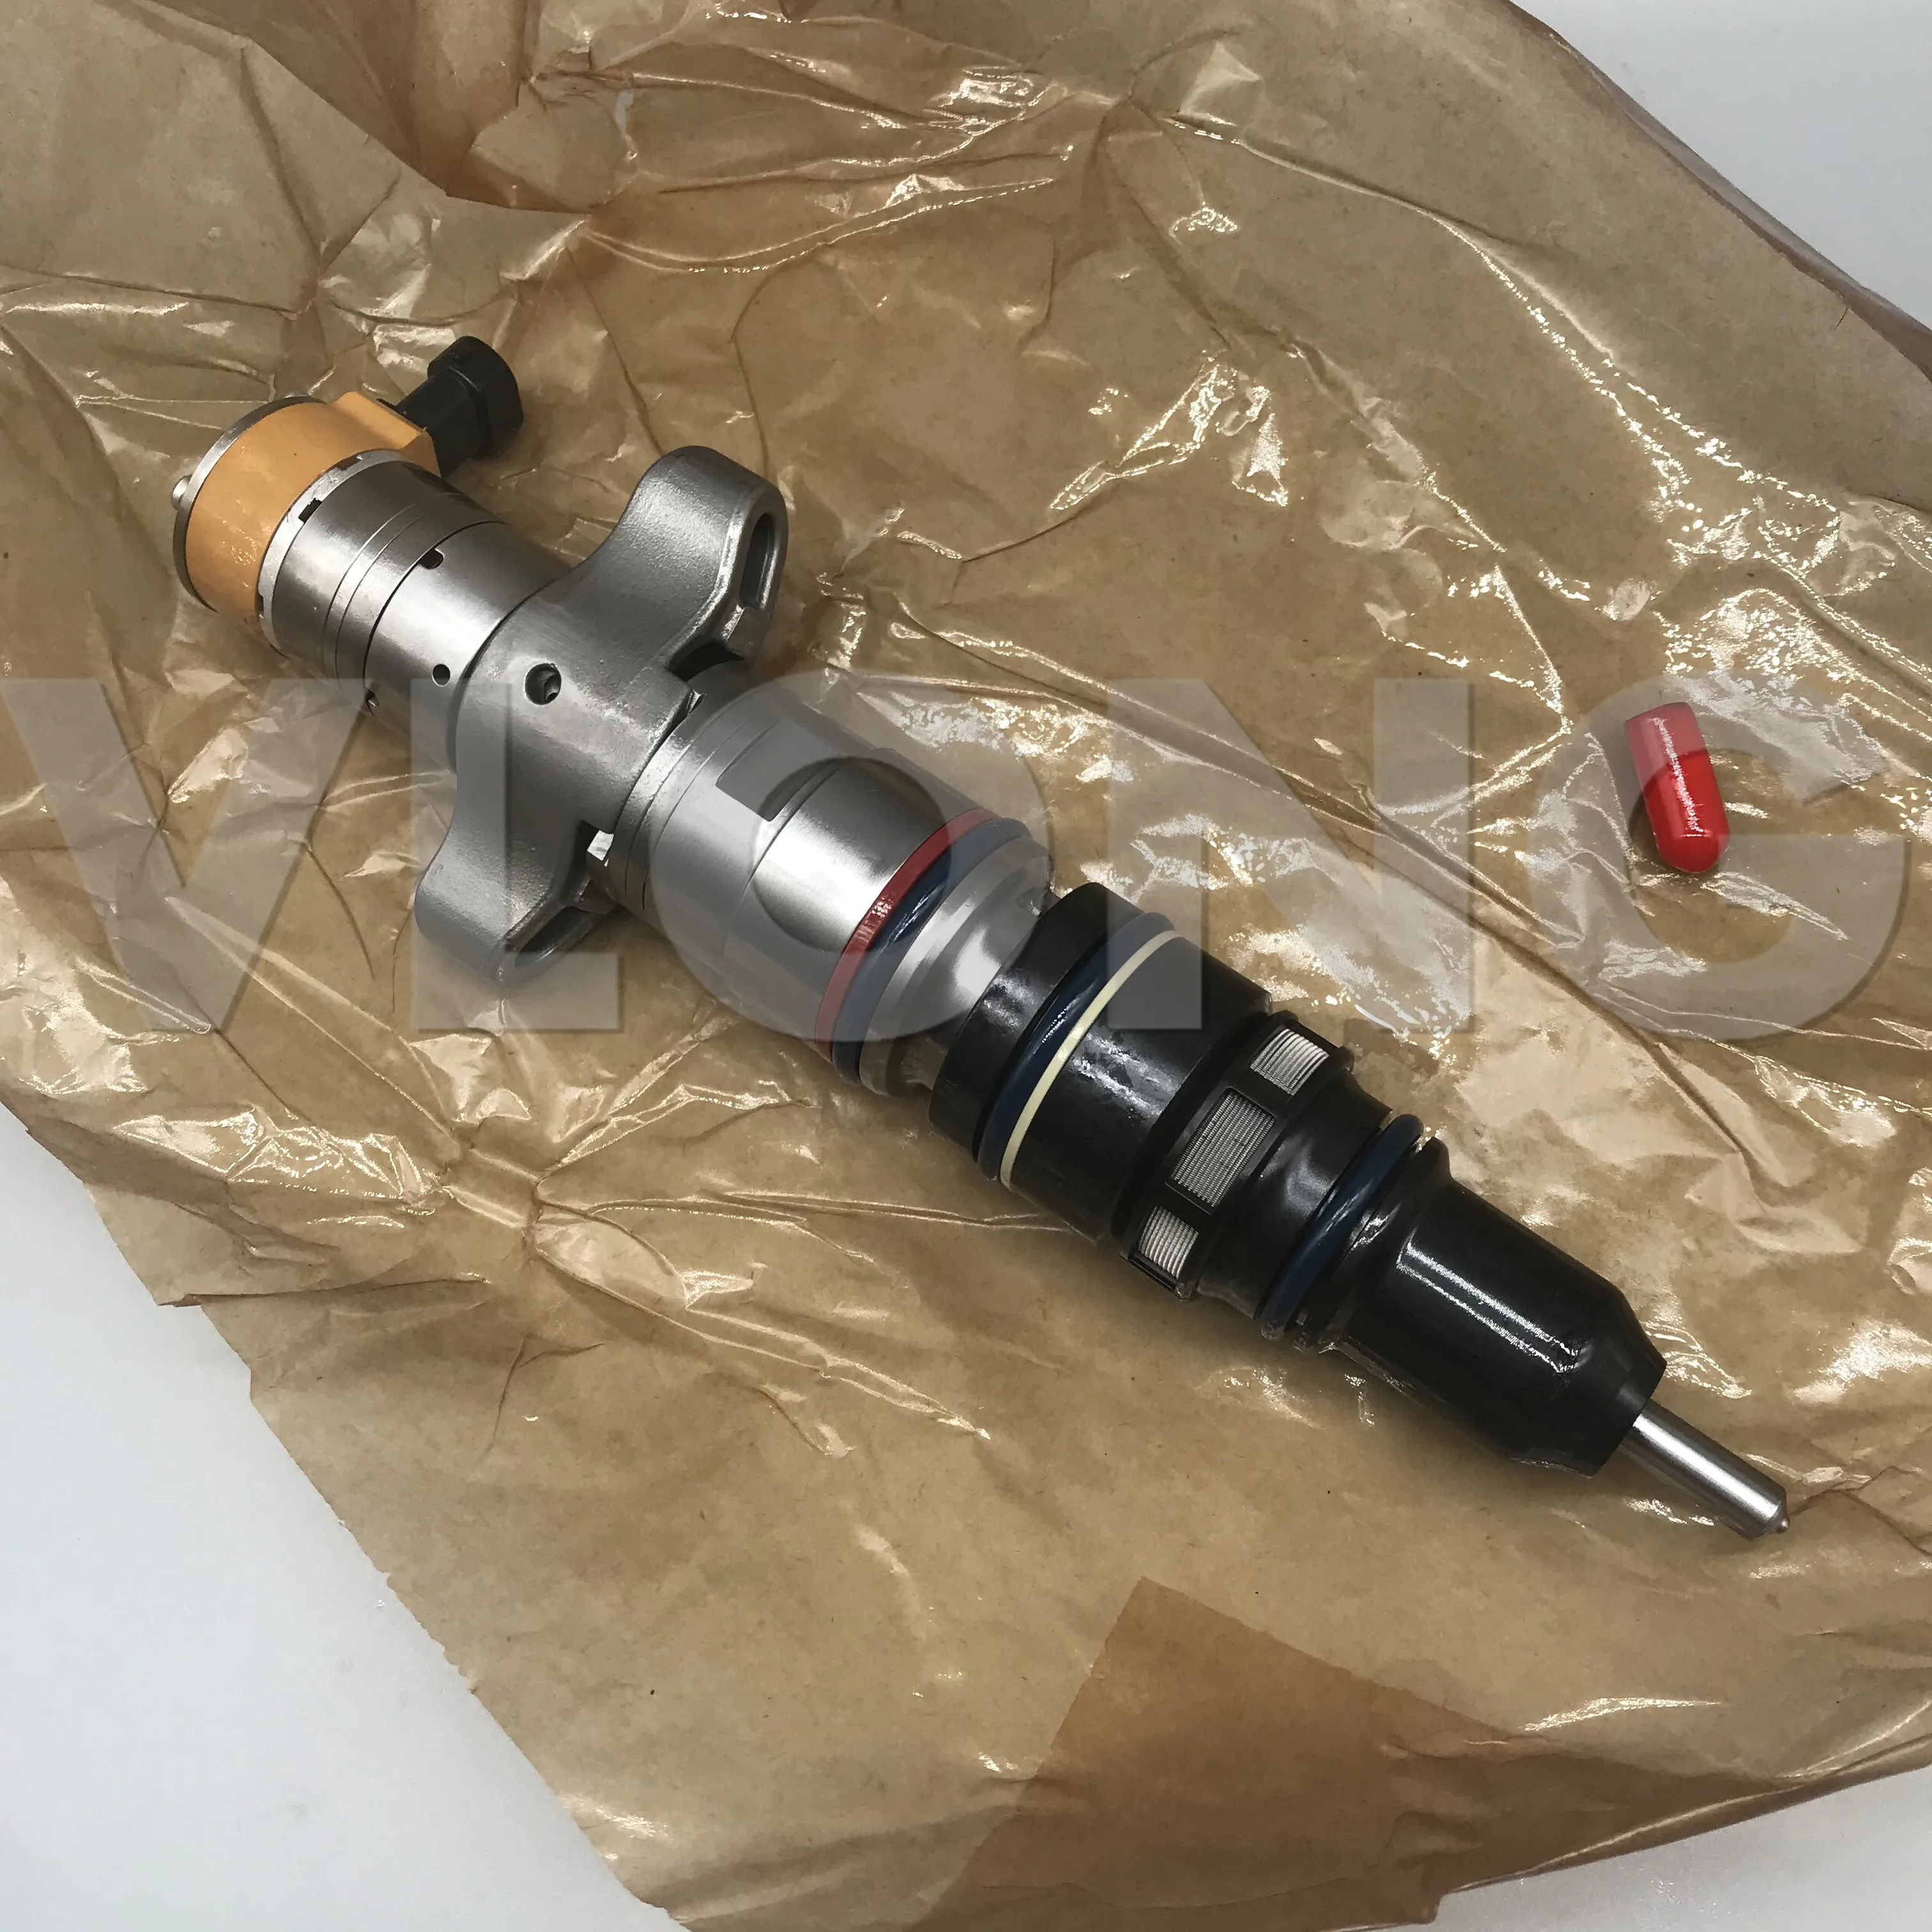 

durable C9 injector assy 10R7222, for Caterpillar 330C excavator, 235-5261, 387-9436, 242-0857, 267-9710 for C9 engine